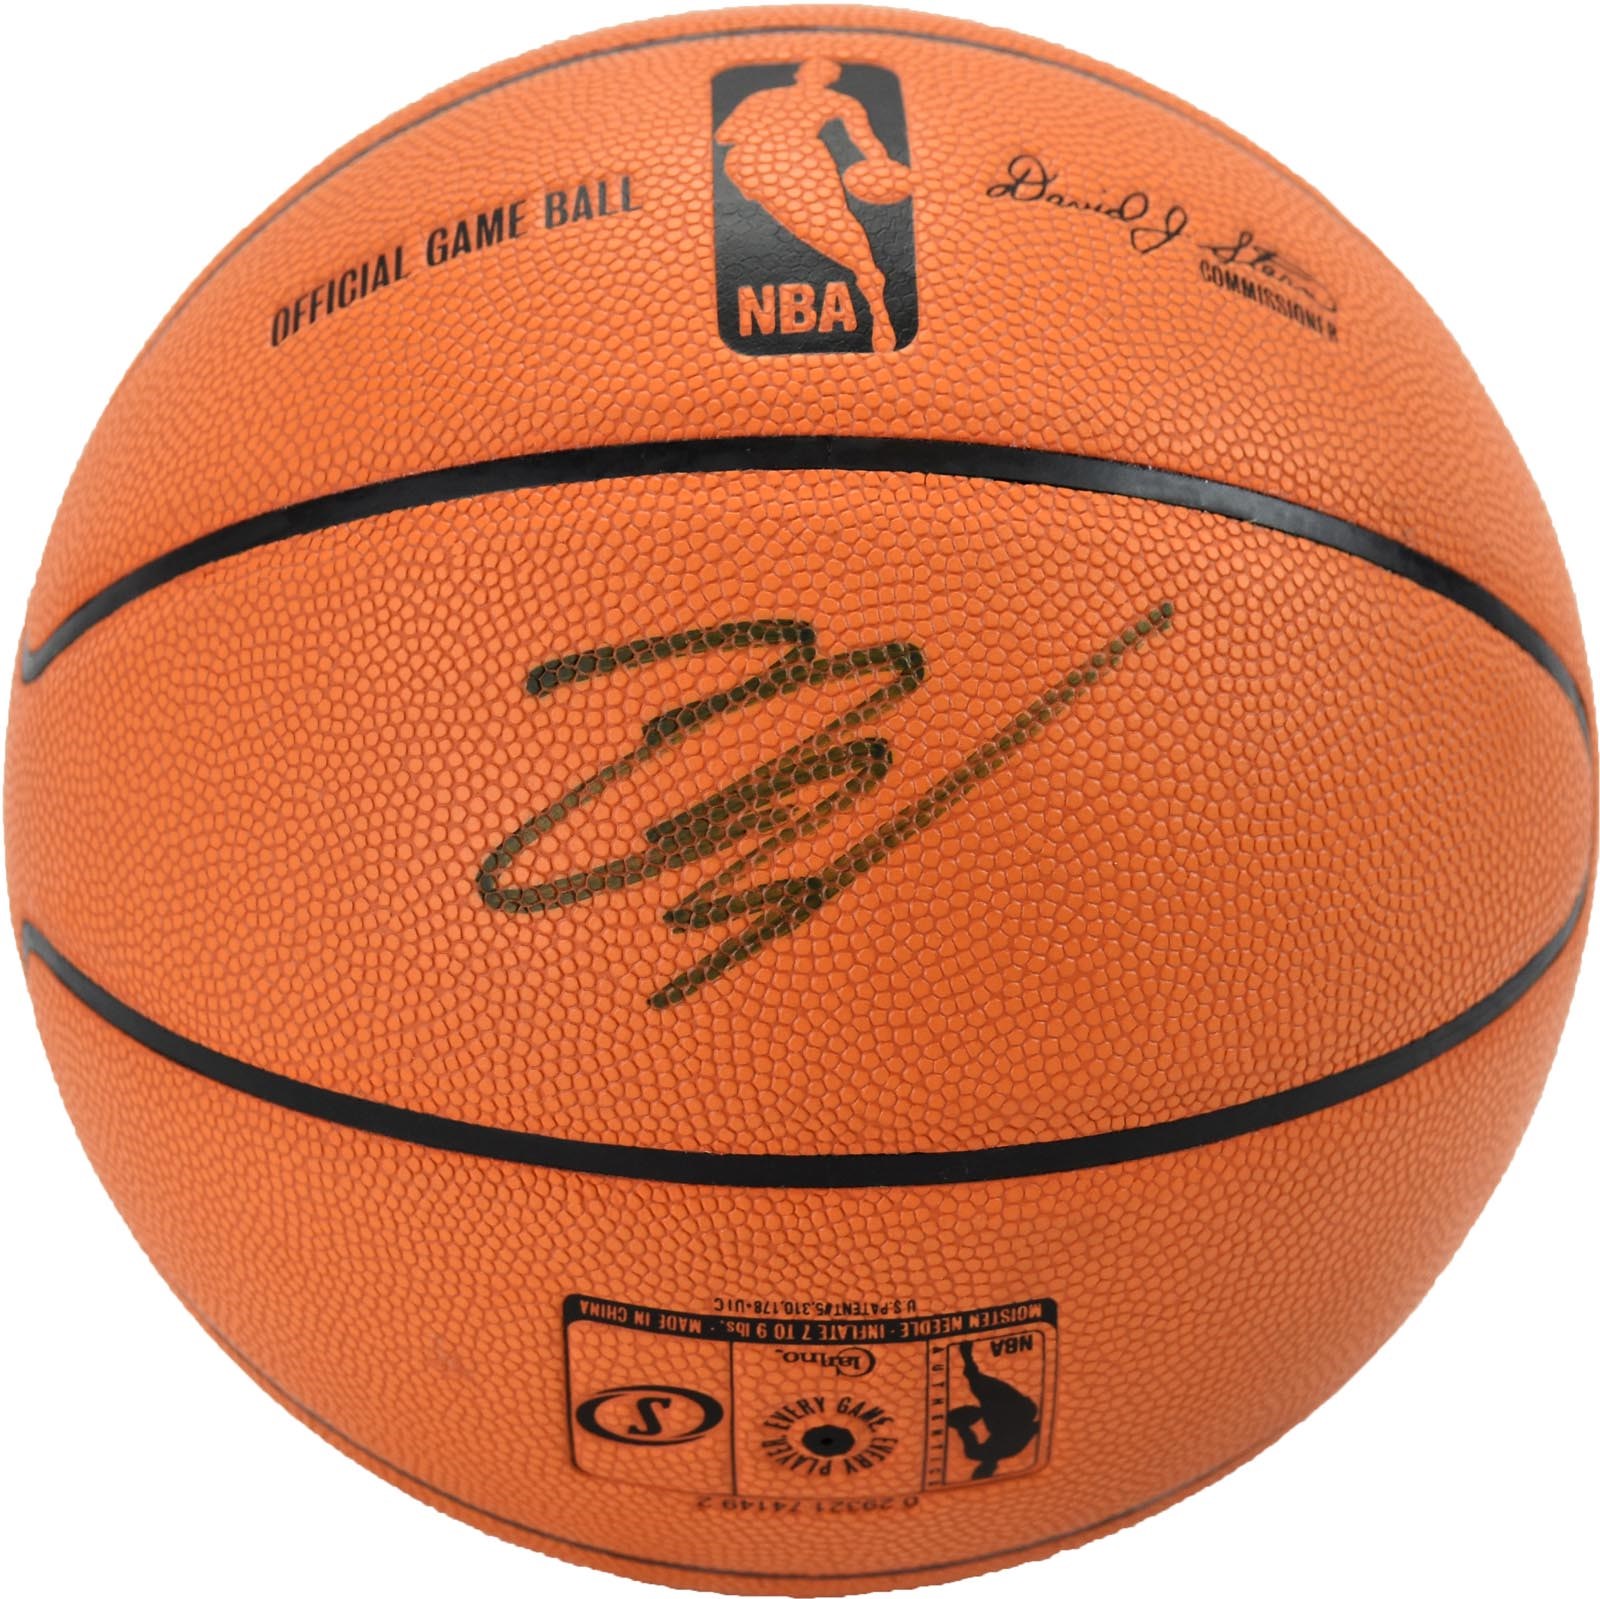 - 2006-07 LeBron James Signed Cleveland Cavaliers Game Used Basketball